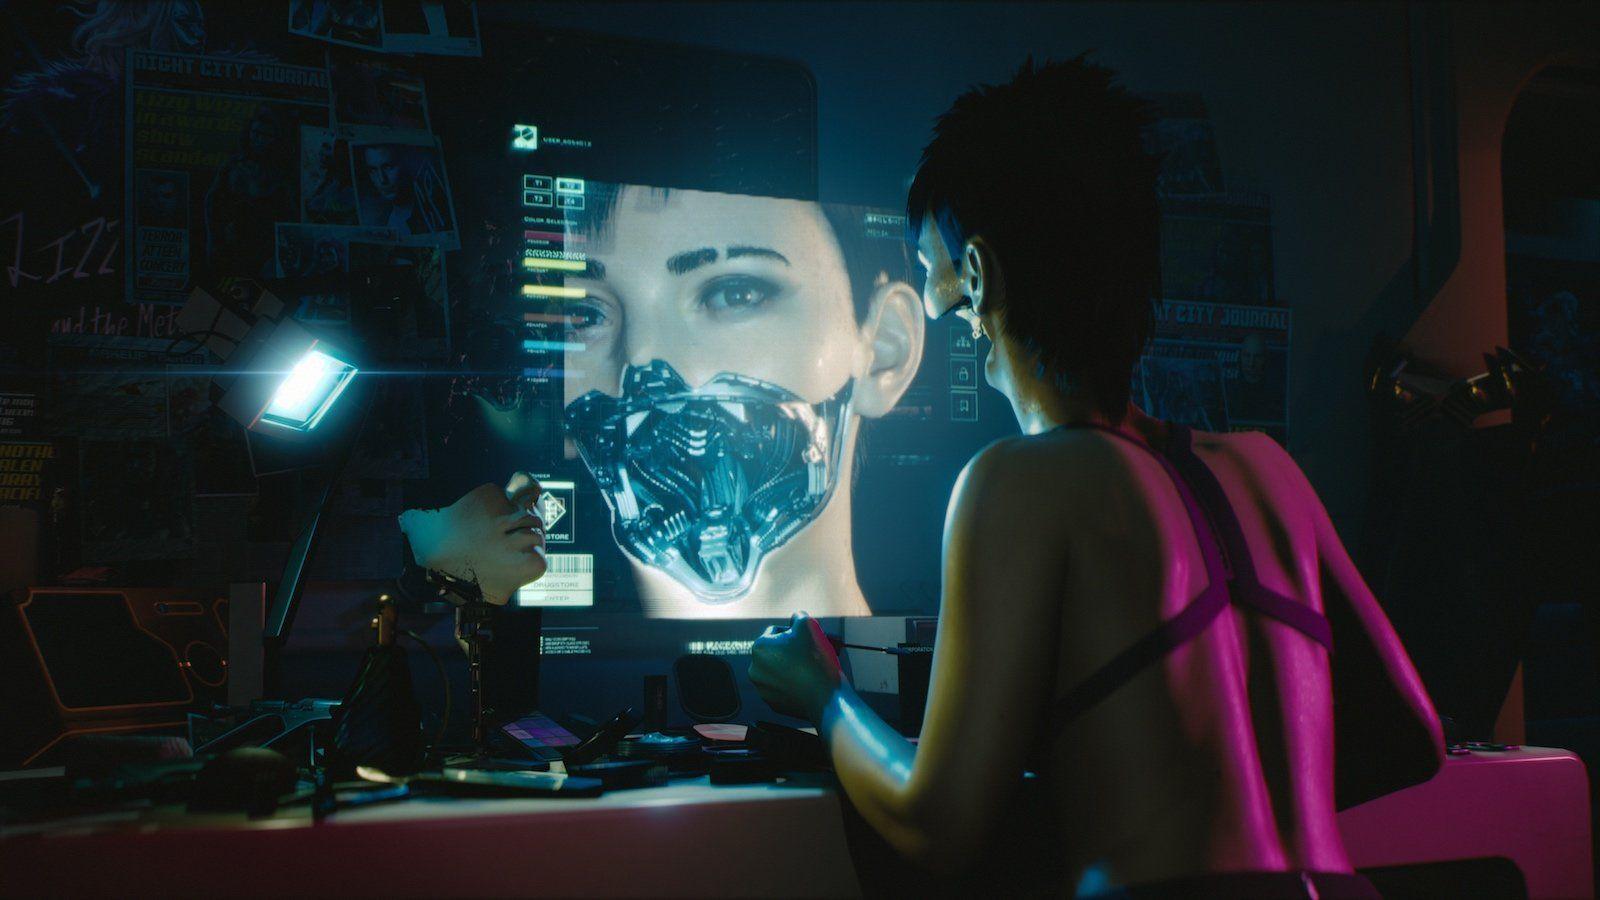 In 'Cyberpunk 2077' you control your own dark, intoxicating future